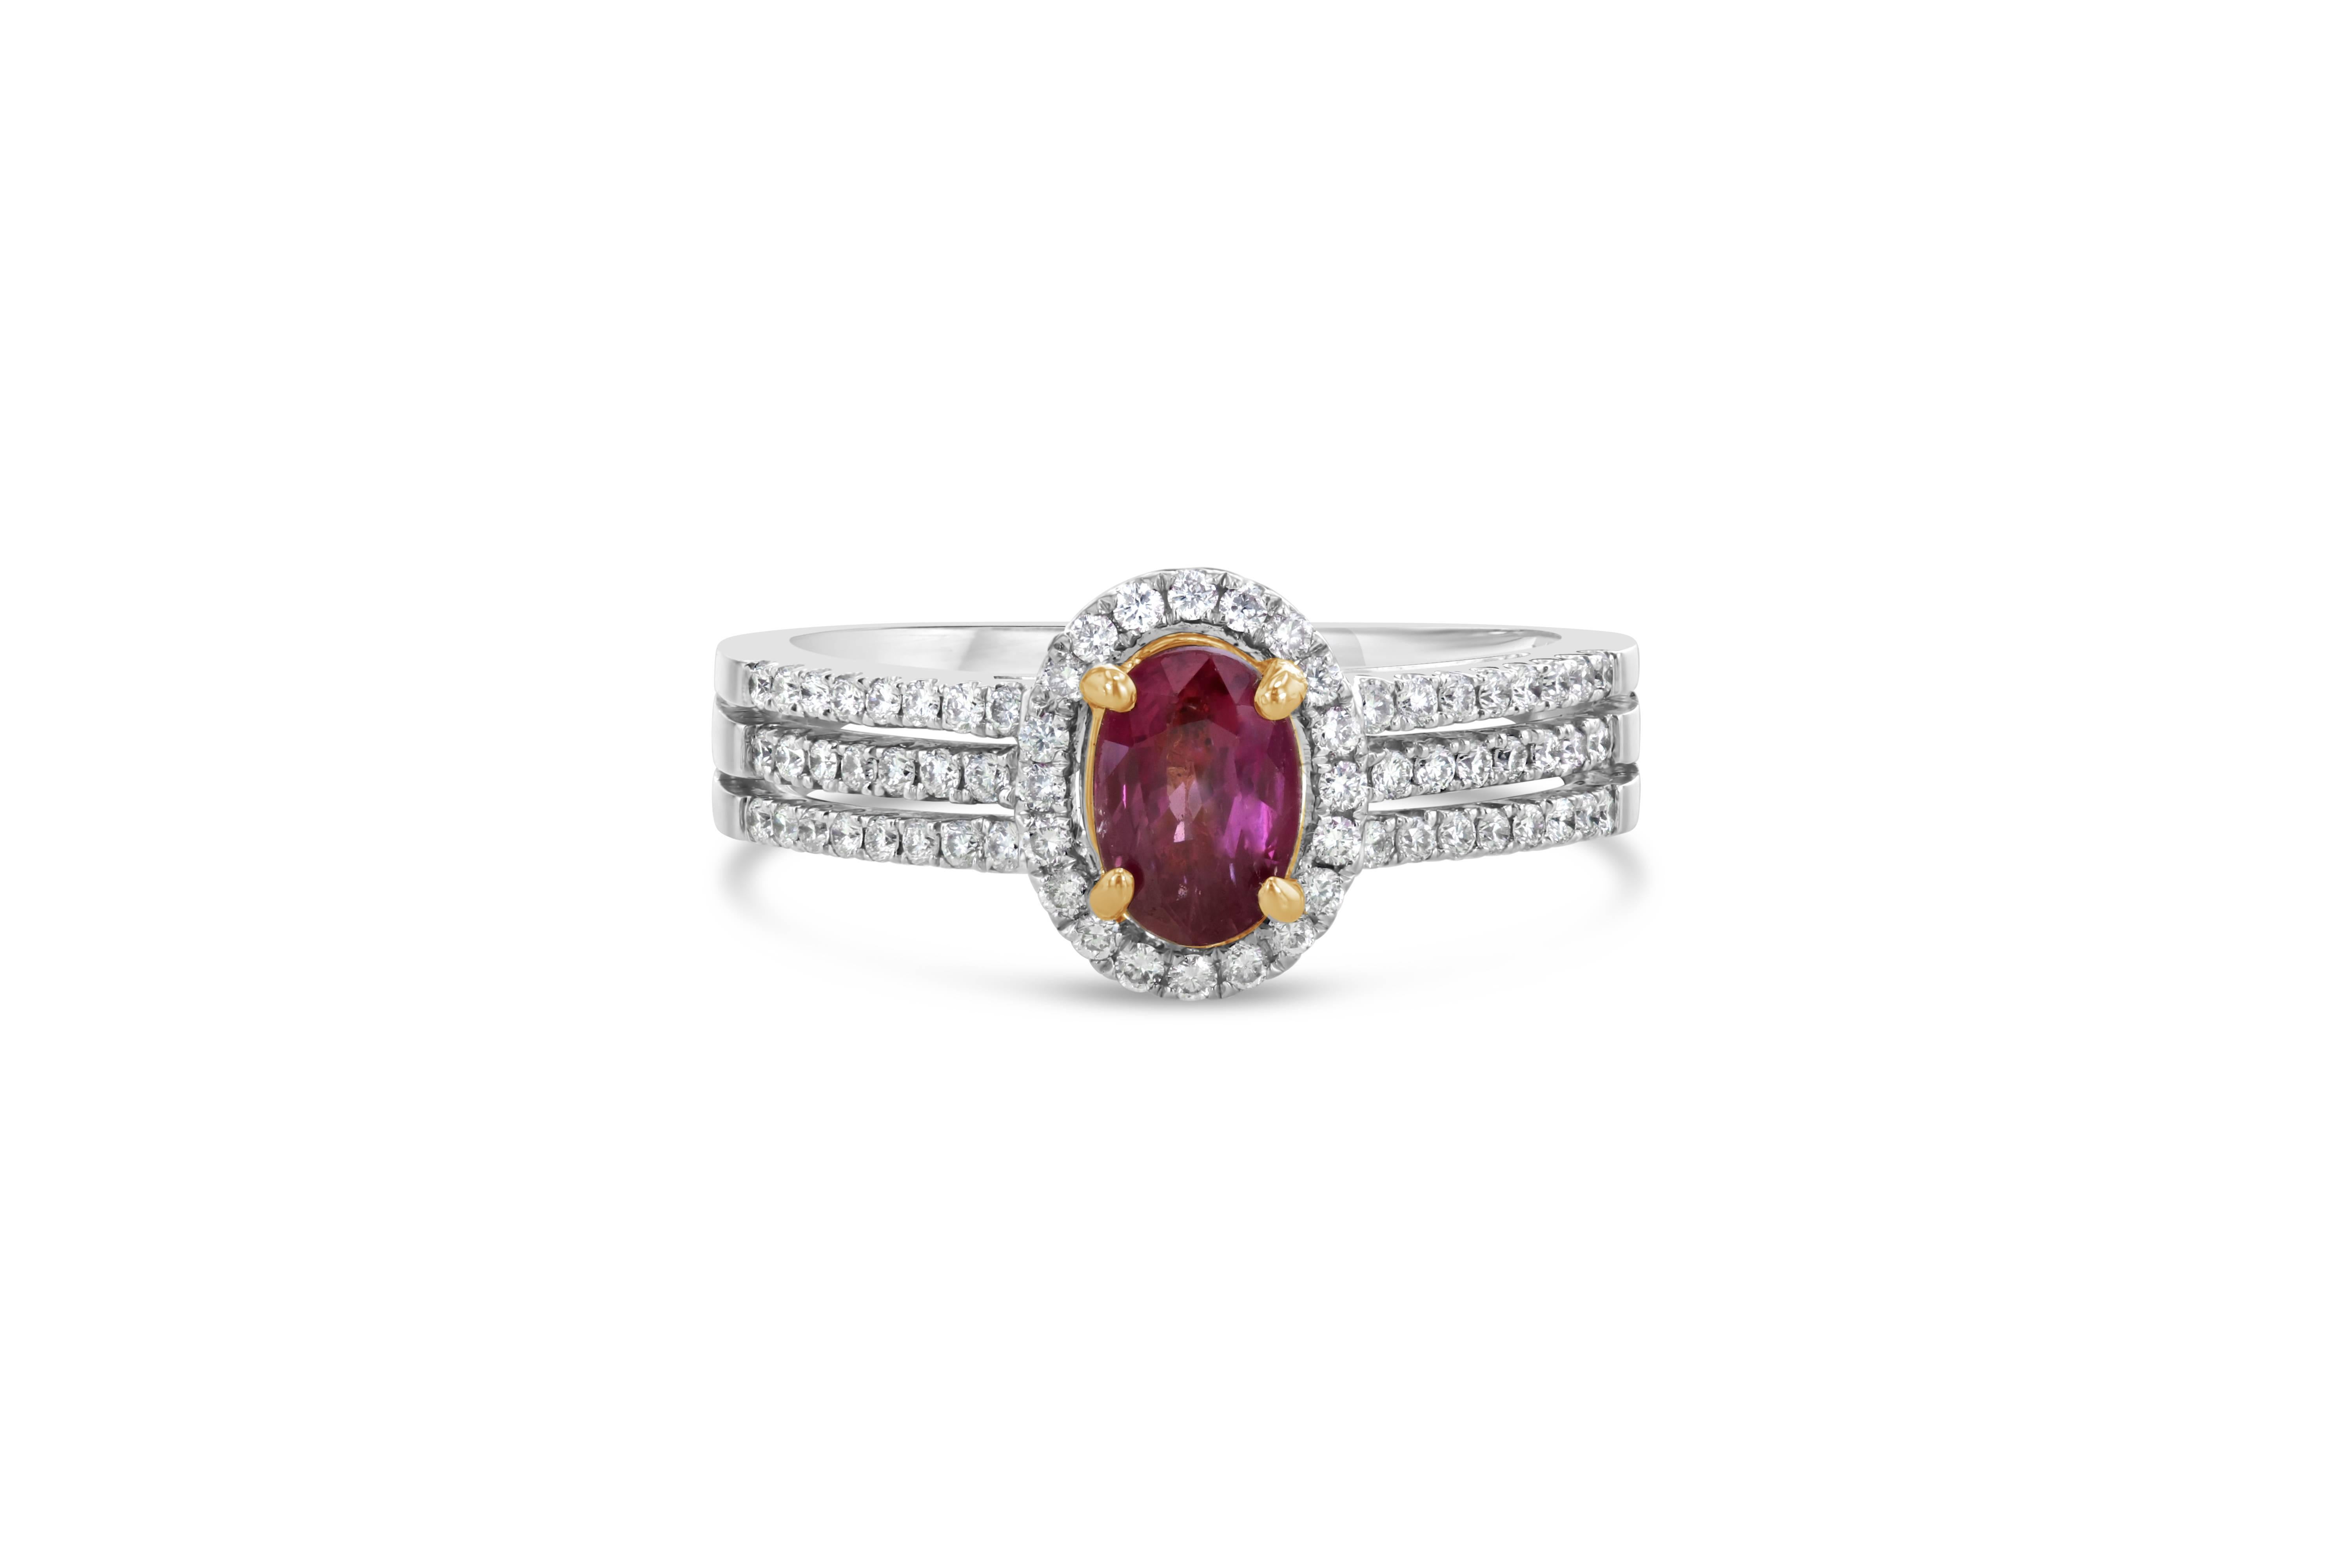 The center stone is a natural 0.81 Carat Ruby from Burma (Myanmar) surrounded by 66 Round Cut Diamonds weighing 0.33 Carats. It is uniquely set in 18K White Gold with beautiful Yellow Gold Prongs holding the Ruby which brings out the color and fire